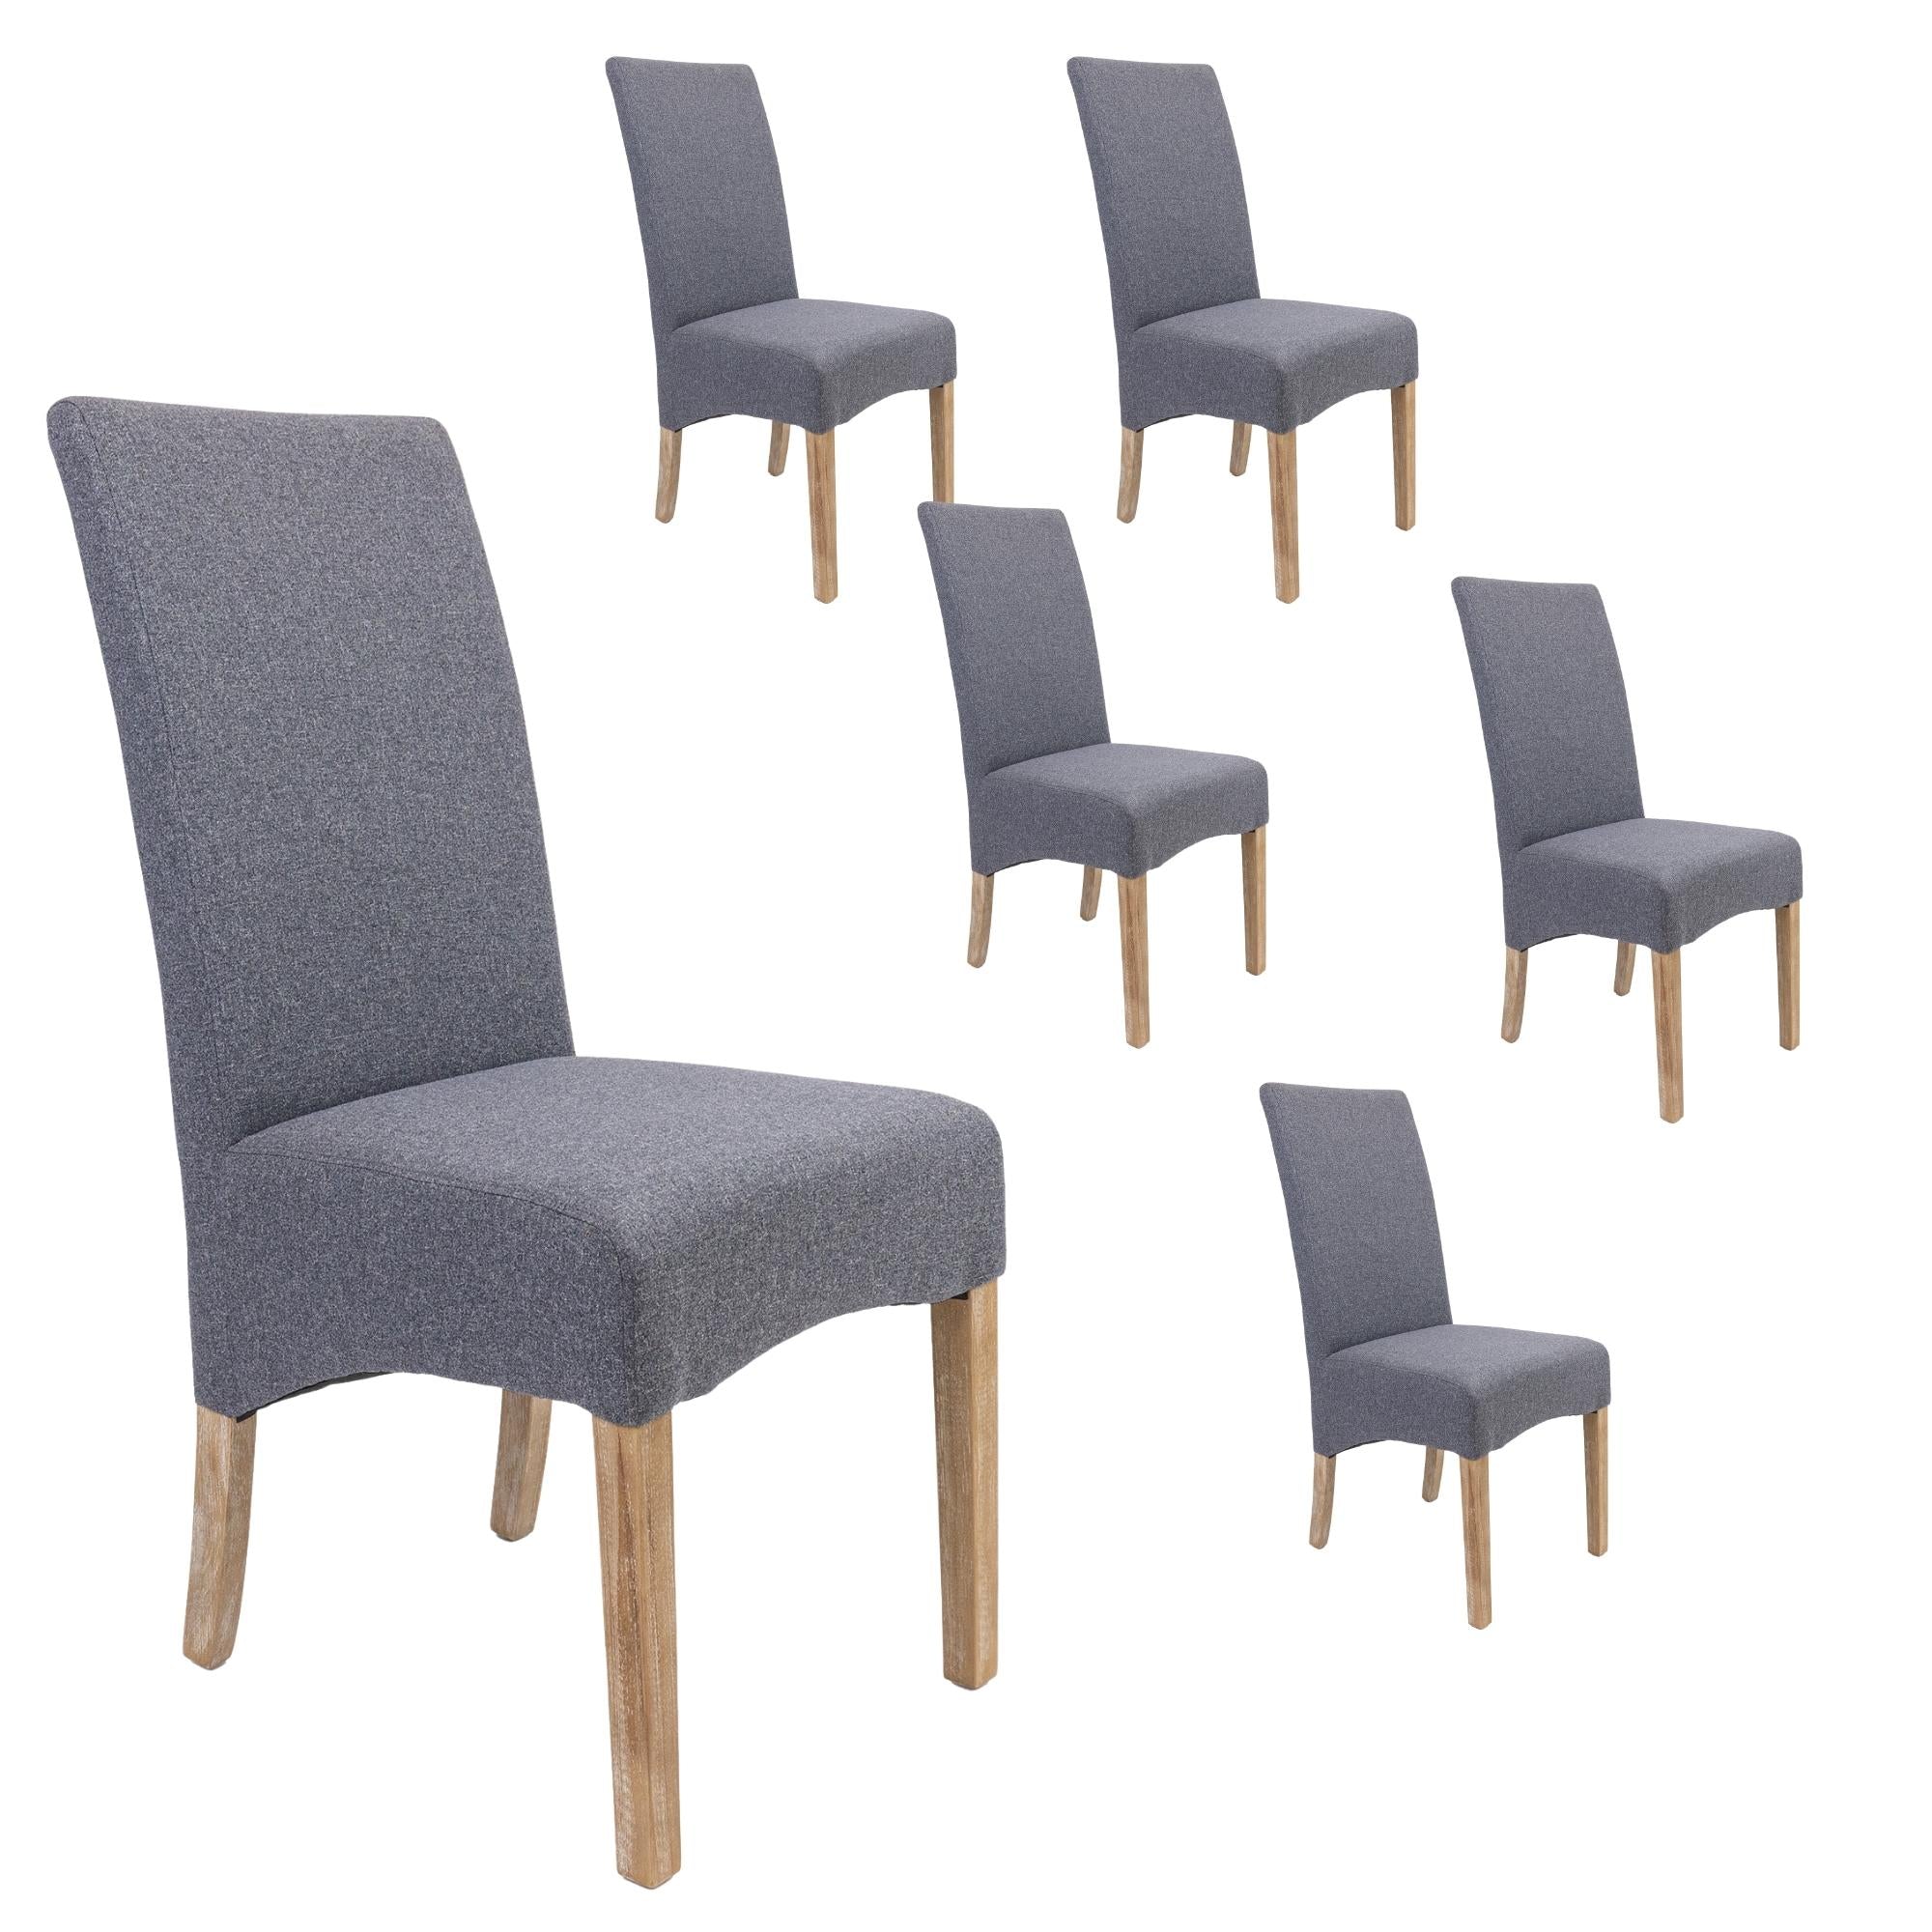 Set of 6 Grey Fabric Dining Chairs, Rubberwood Legs